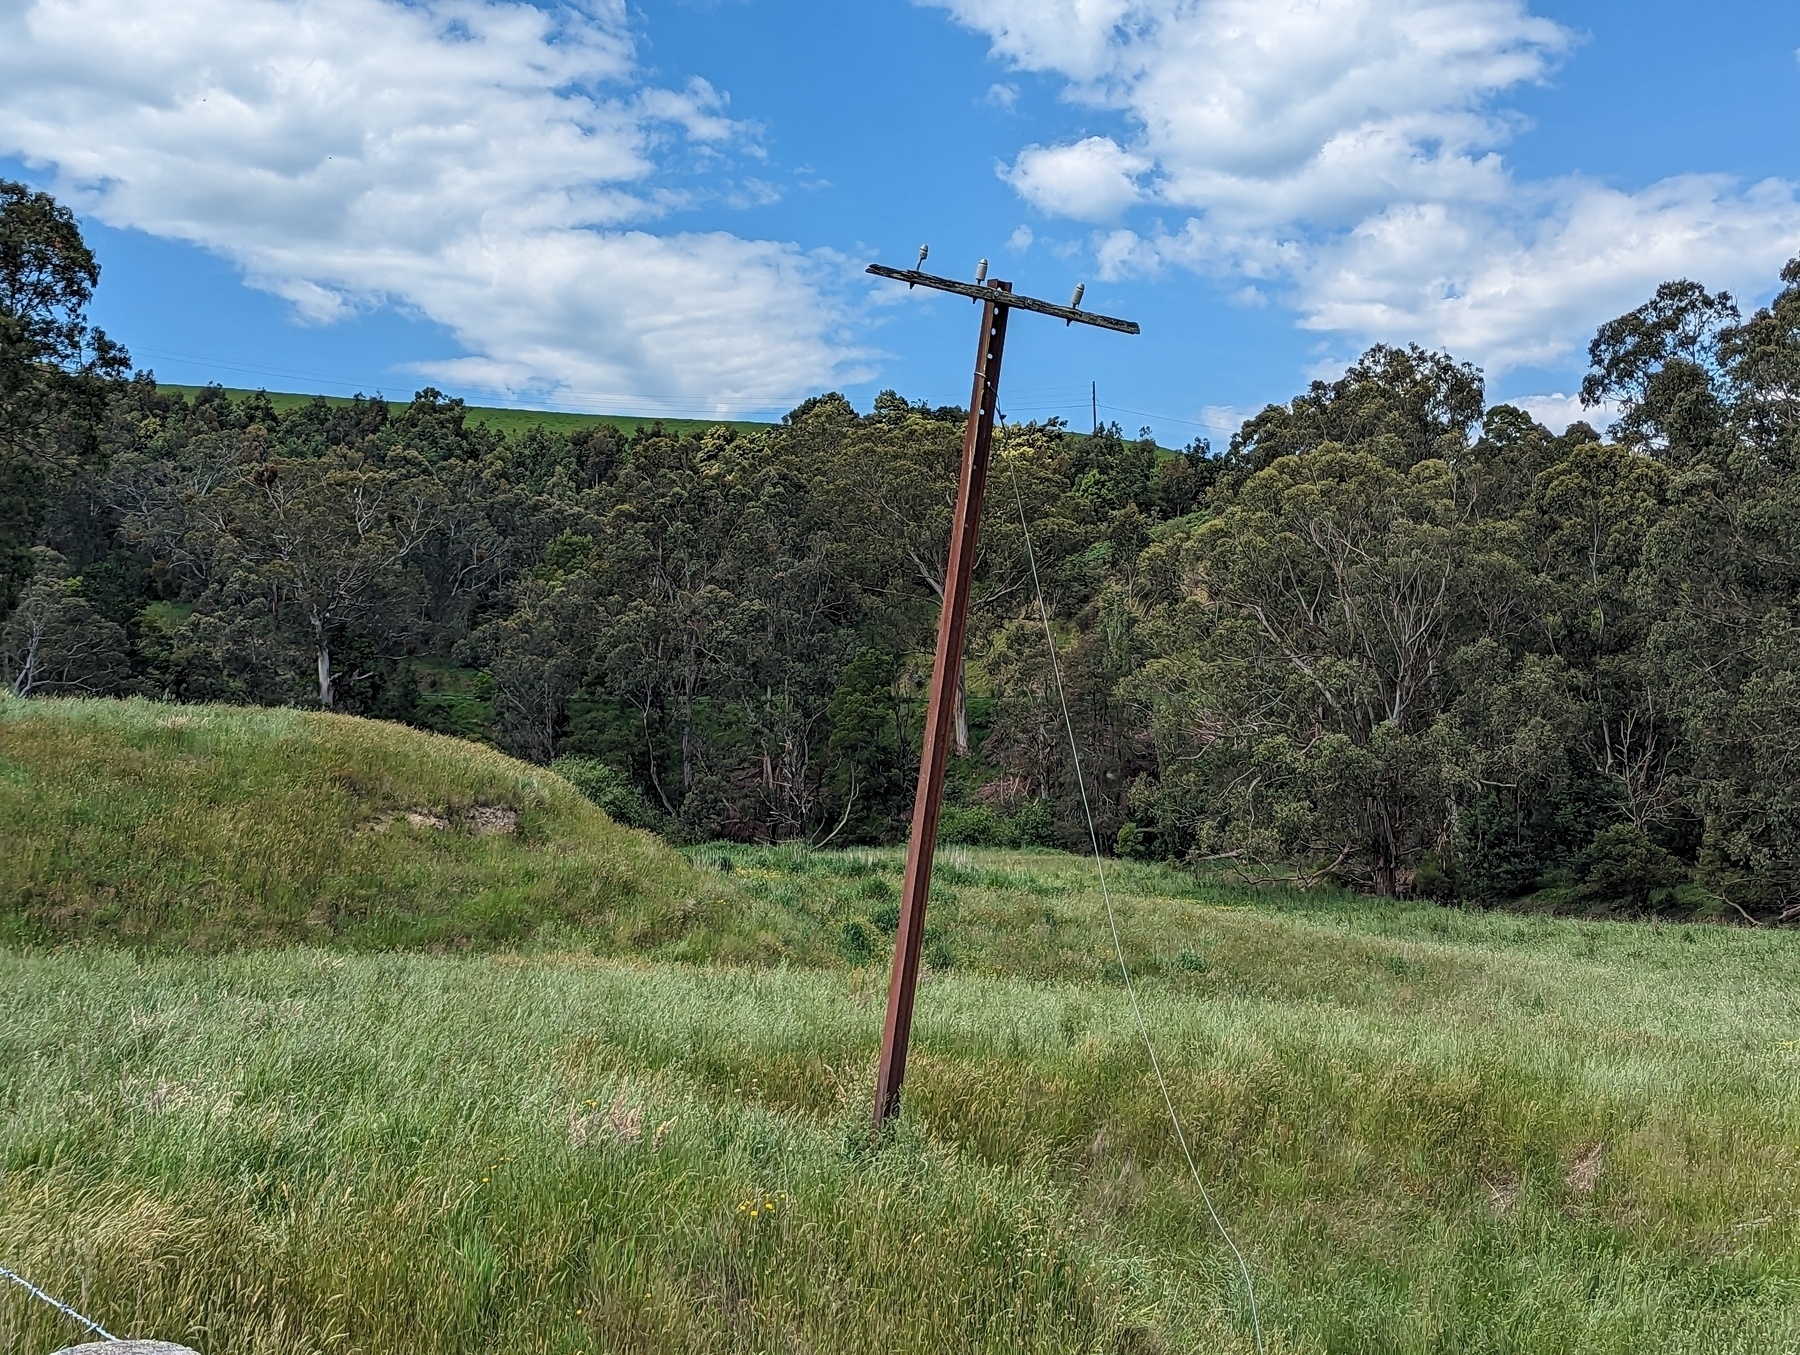 A run-down, disused, telegraph pole with a stay thats leaning to the right